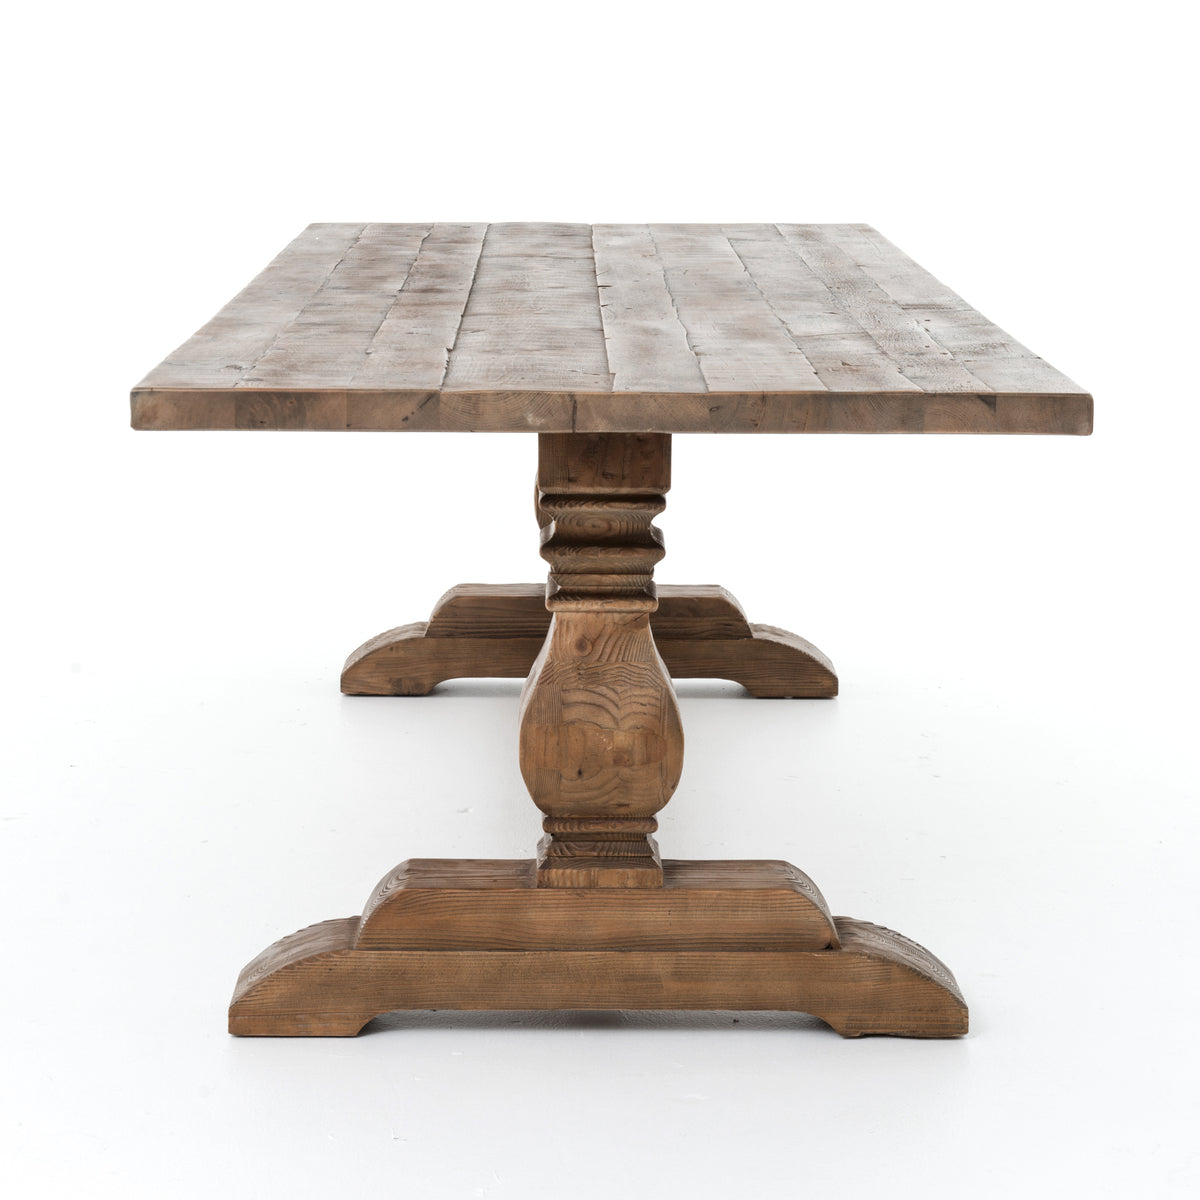 DURHAM DINING TABLE 110"